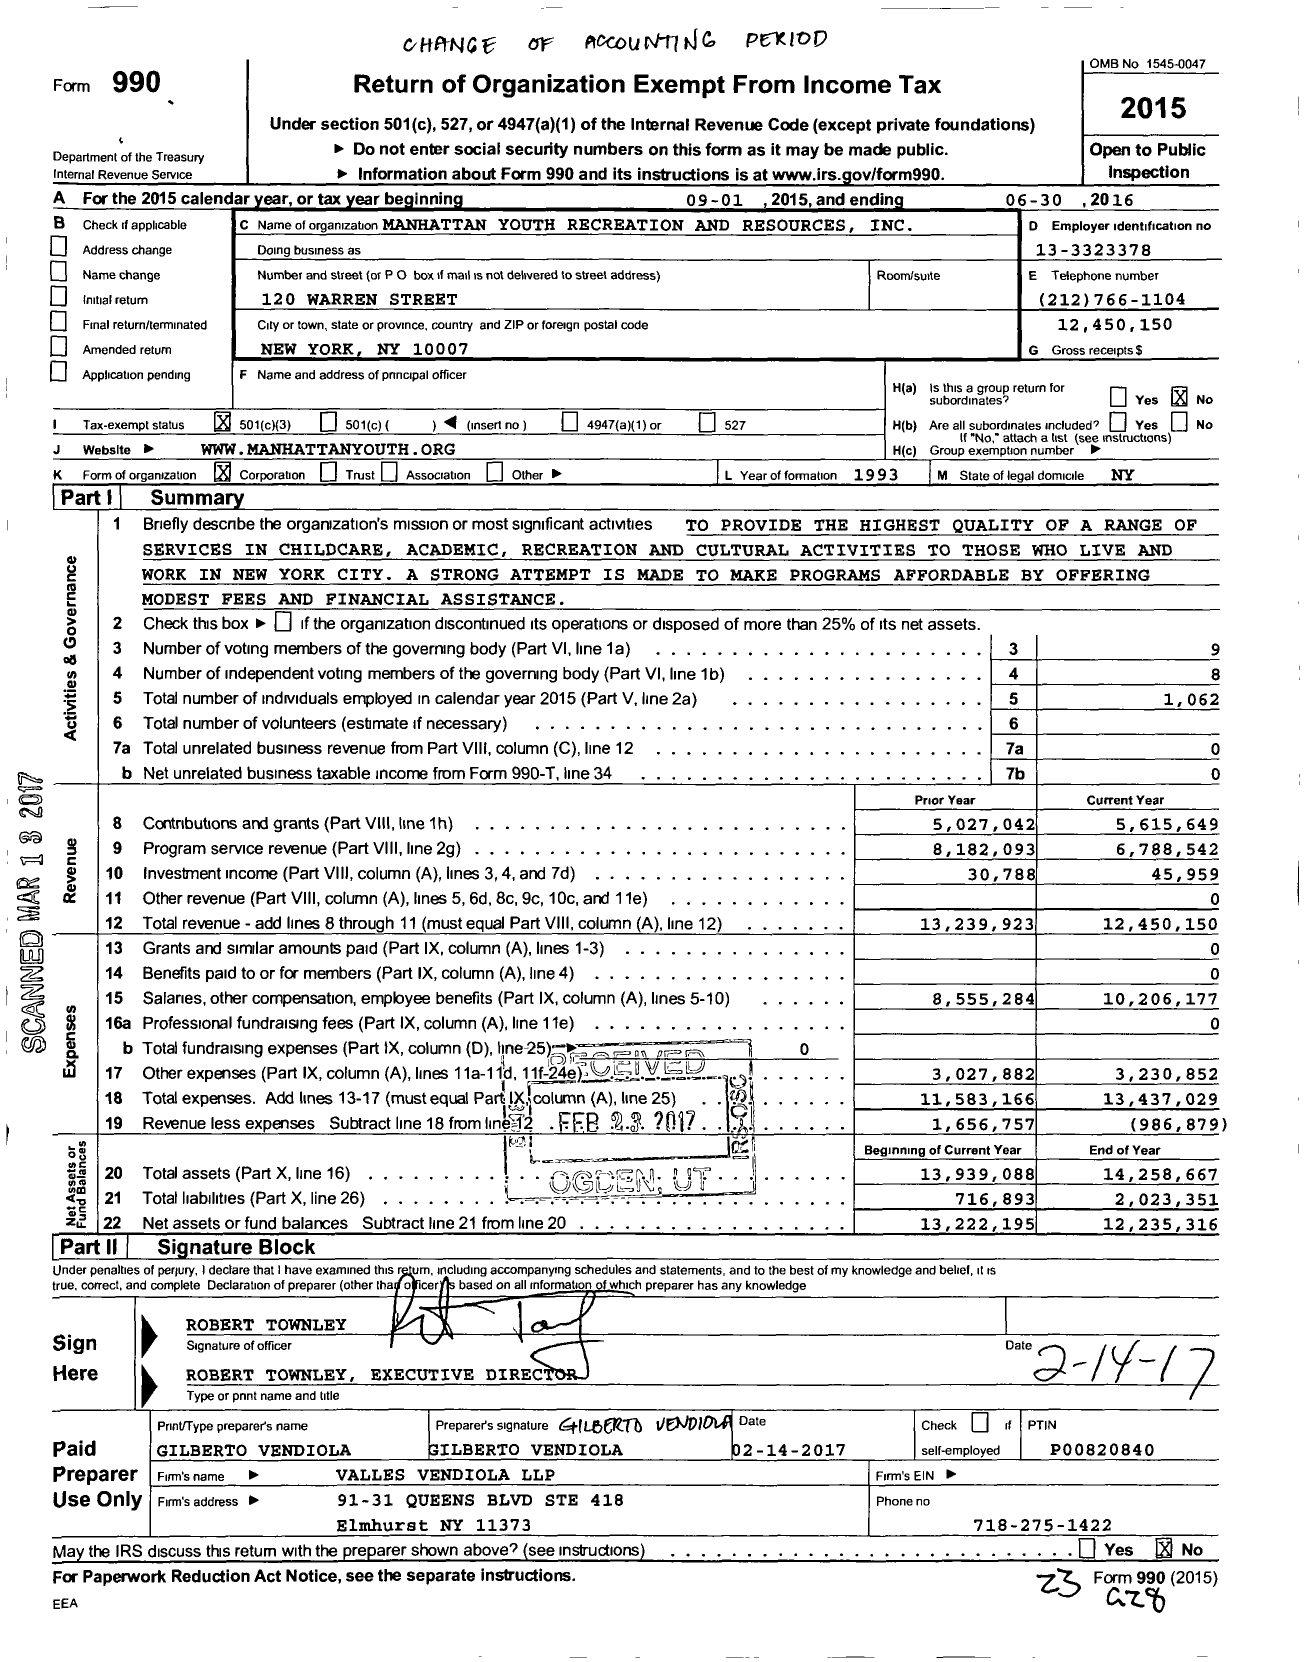 Image of first page of 2015 Form 990 for Manhattan Youth Recreation and Resources